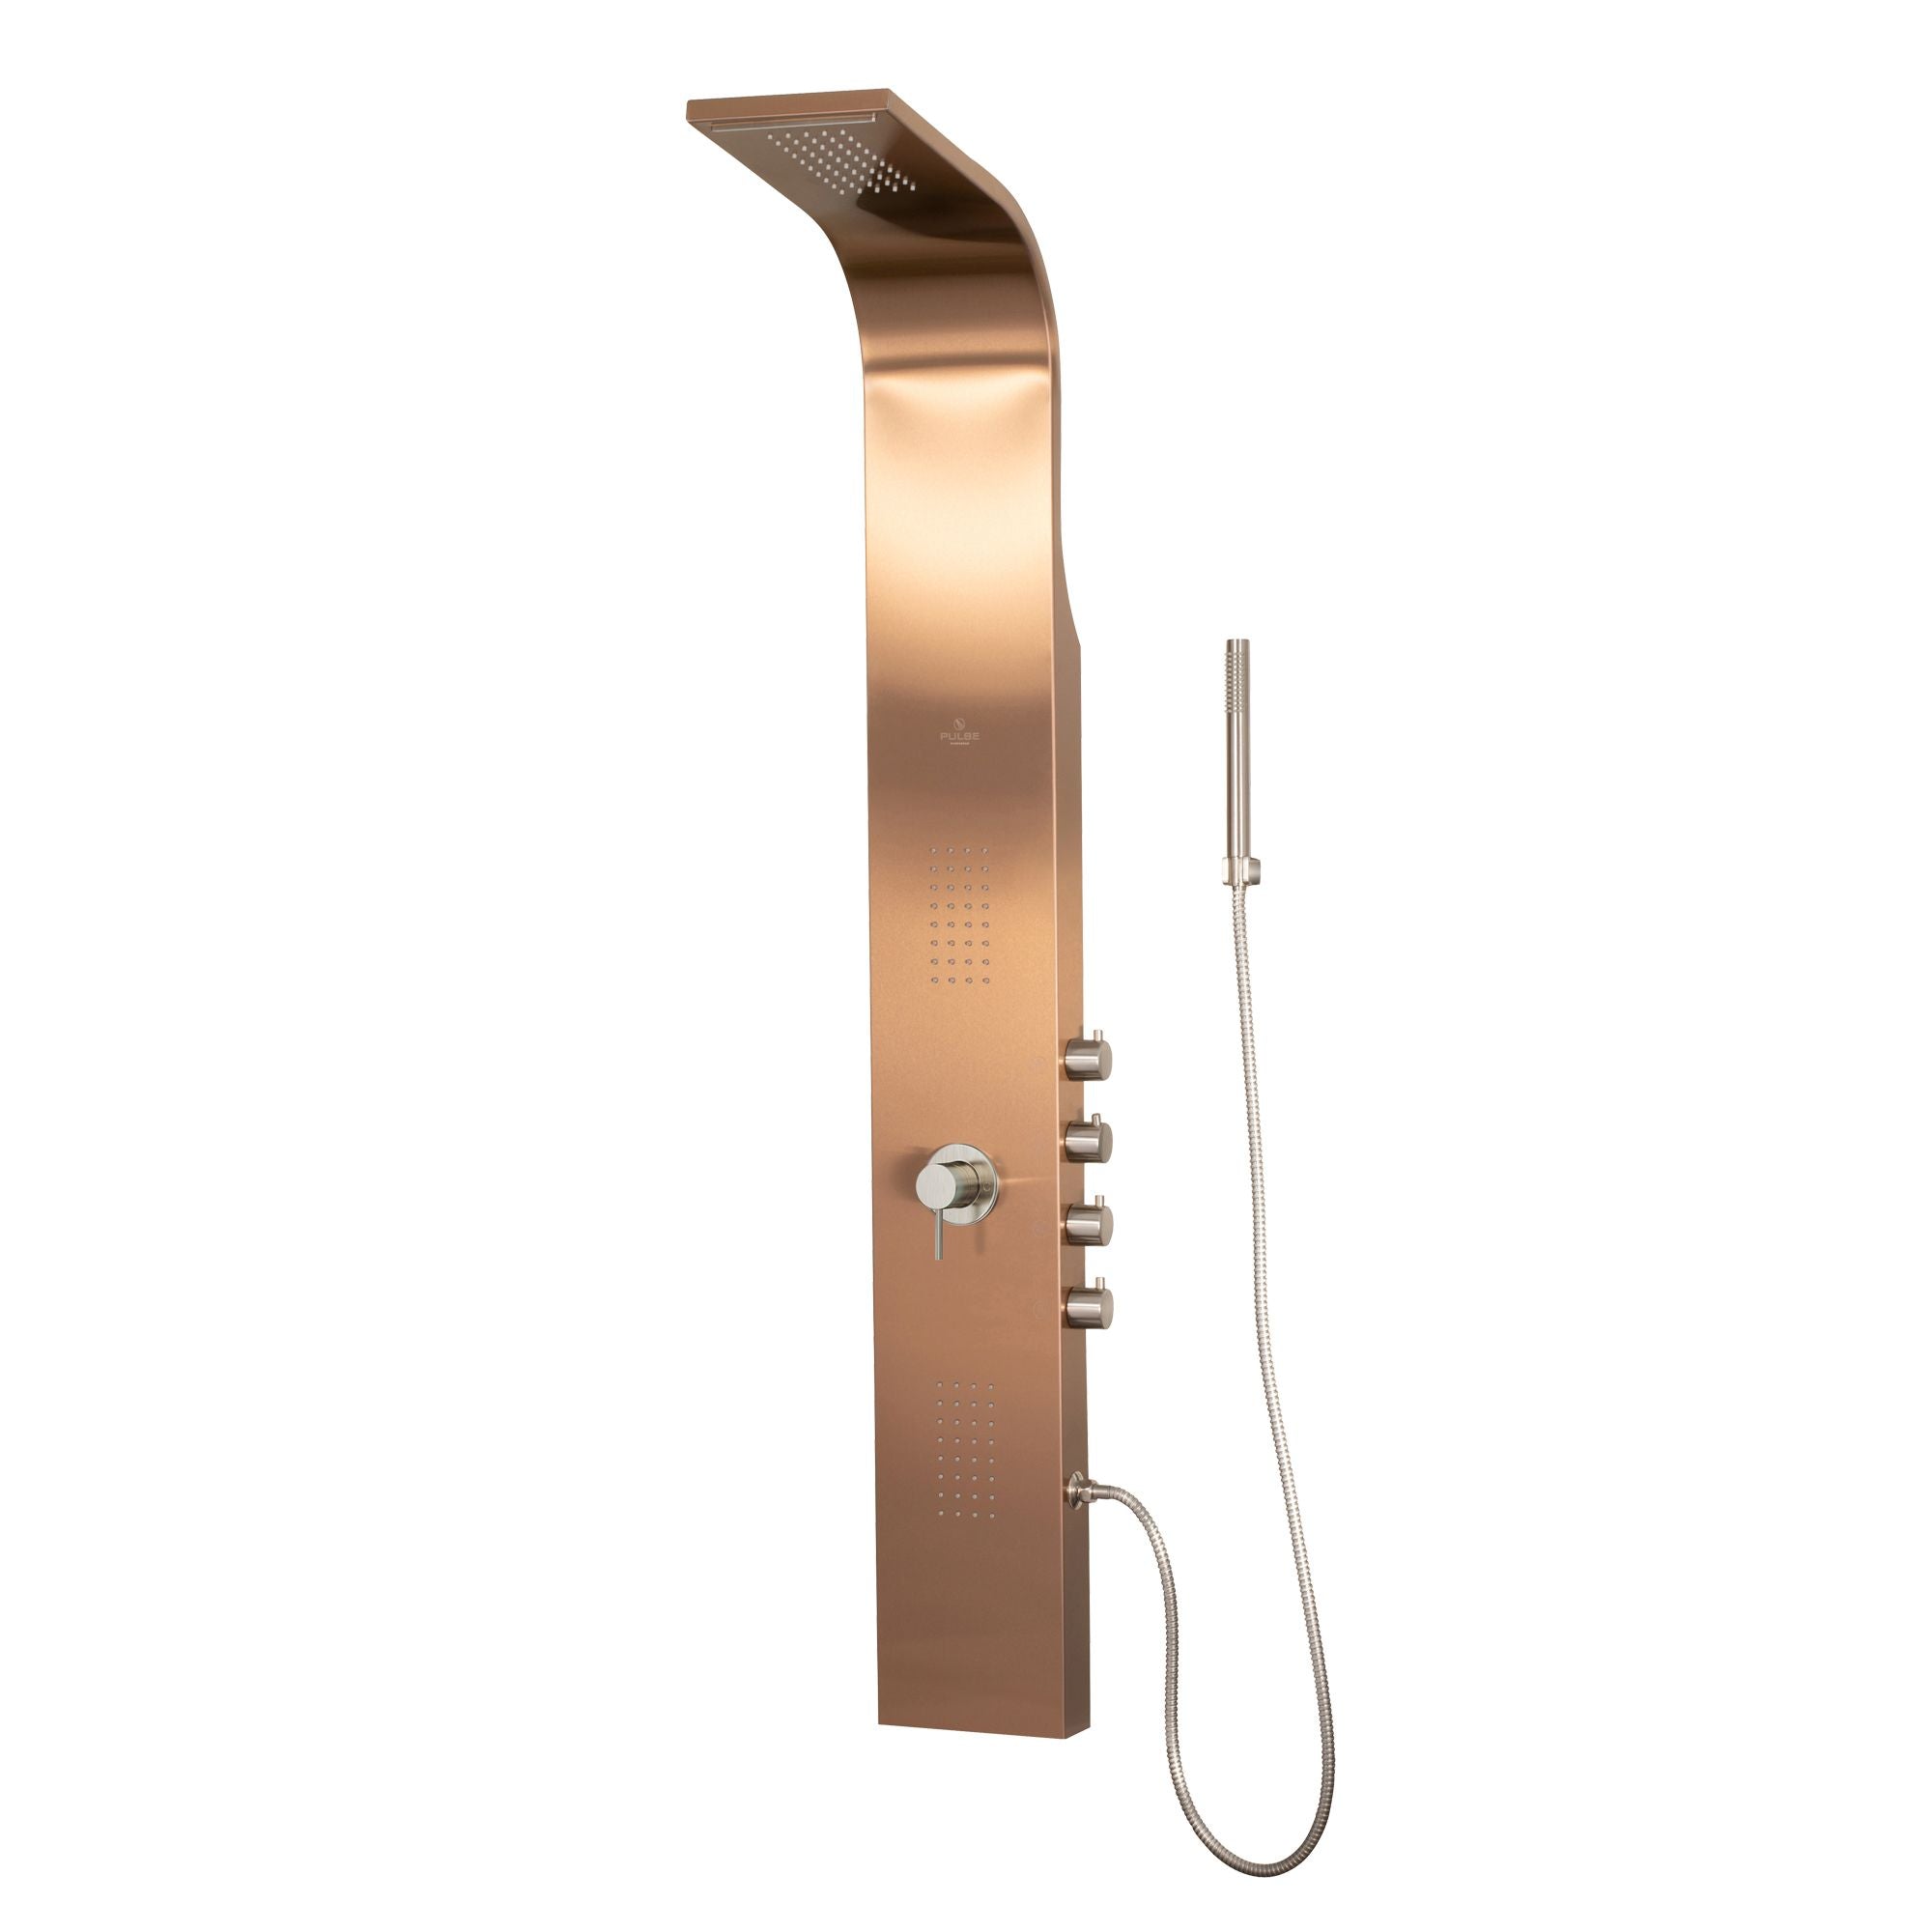 PULSE ShowerSpas Brushed Bronze Stainless Steel Shower Panel - Santa Cruz ShowerSpa - electro-anodized brushed bronze finish - with Oversized body jets, hand shower with double-interlocking stainless steel hose, pressure balance valve and Multiple diverters - 1033 - Vital Hydrotherapy